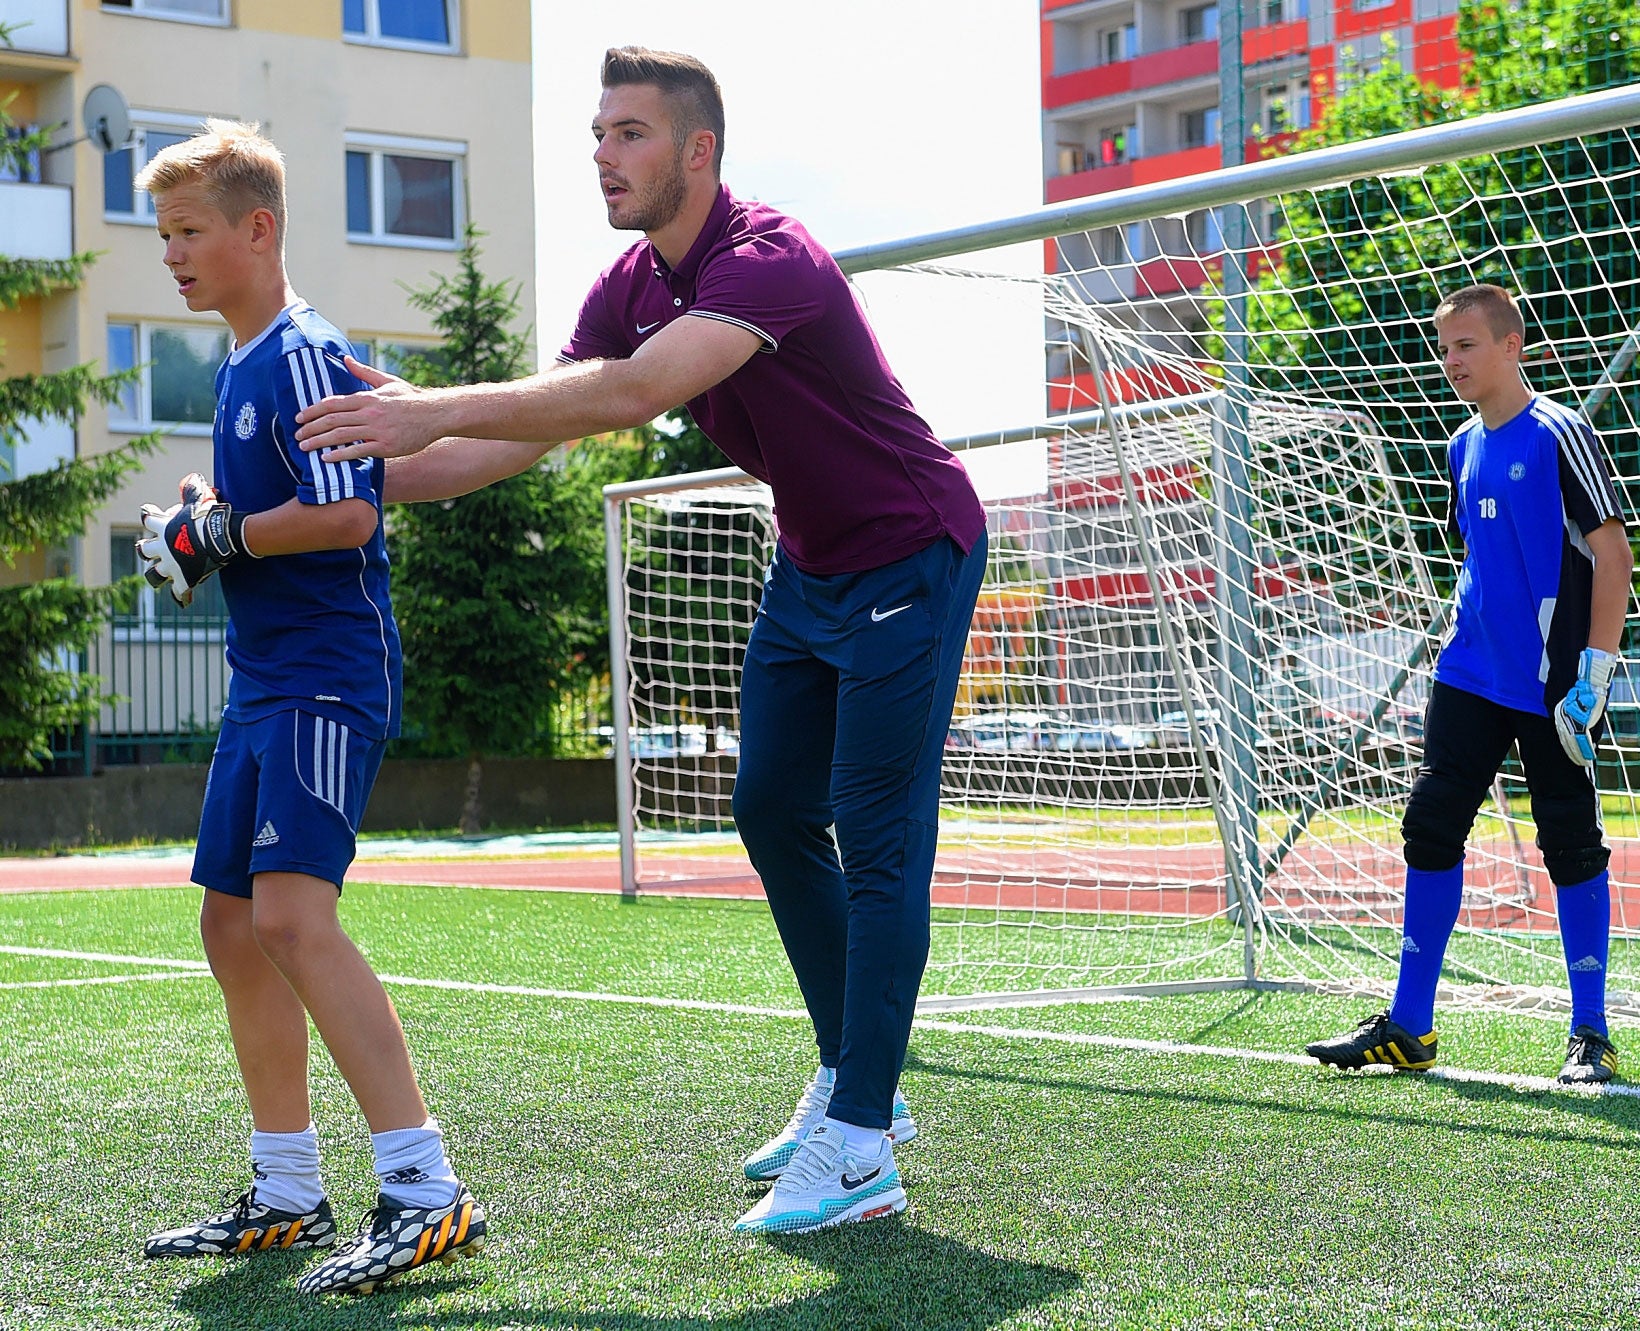 Jack Butland joins in a coaching session during a visit to Heyrovskeho School in Olomouc this week